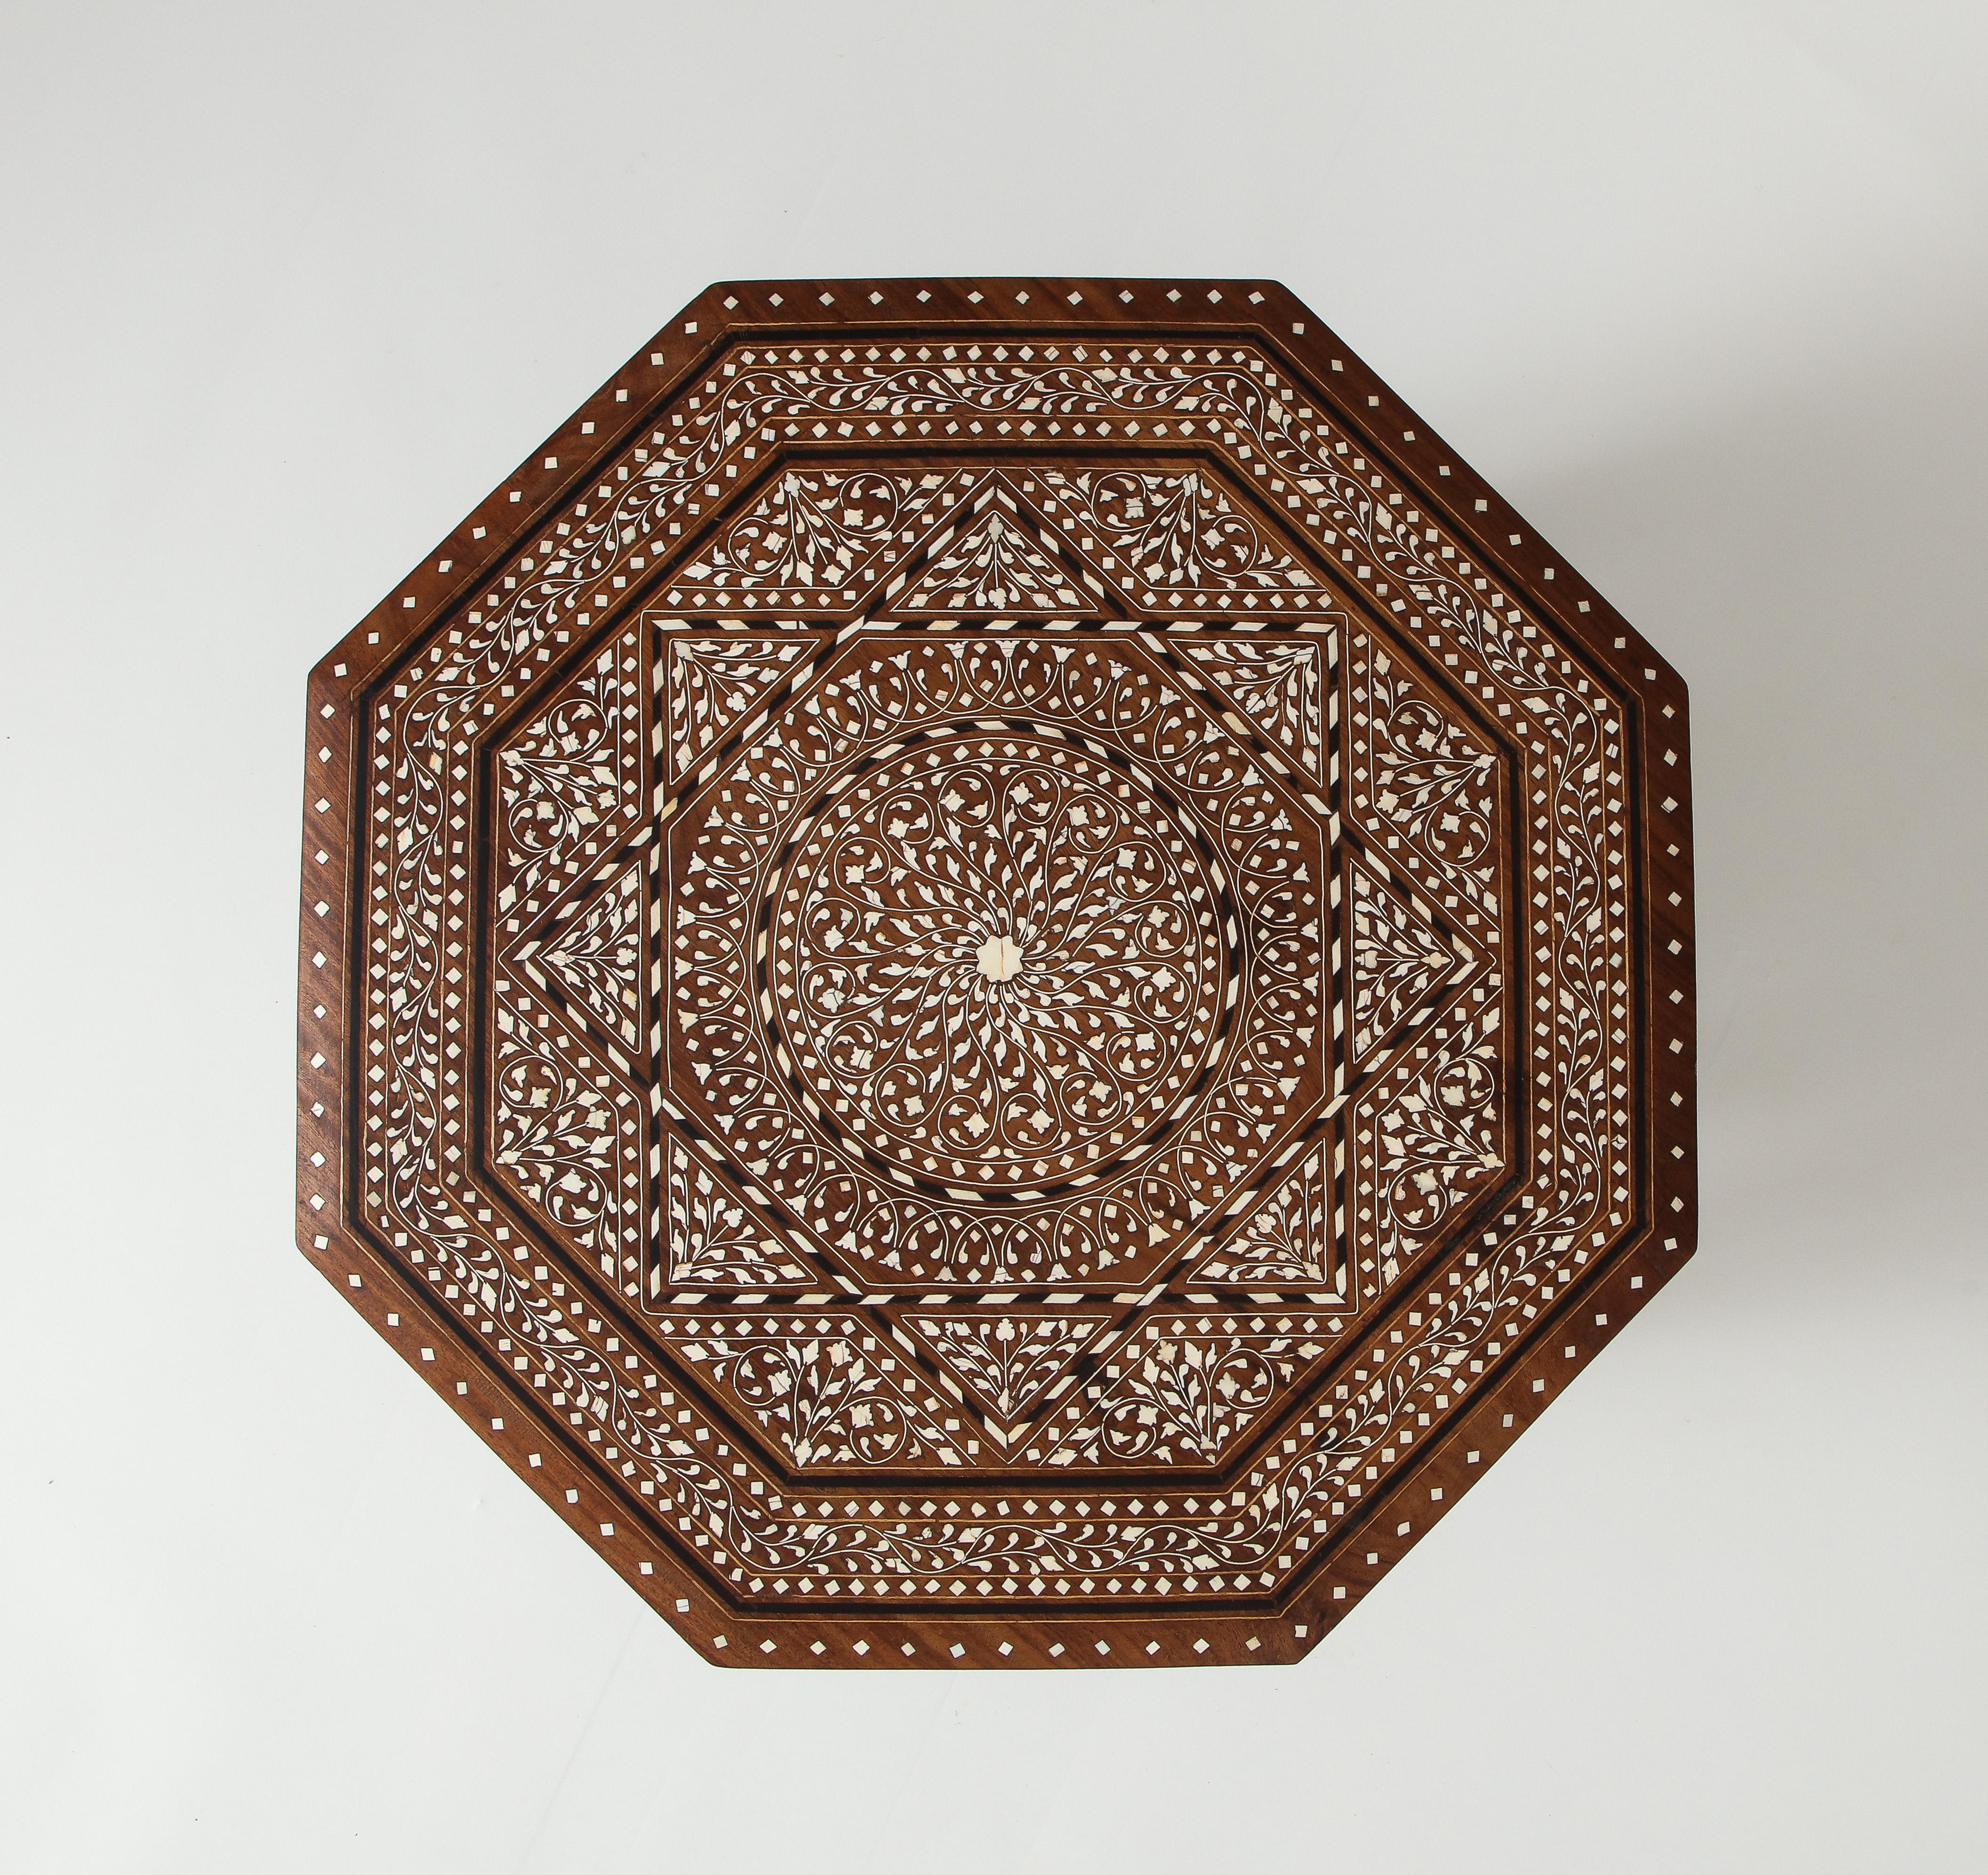 Made of richly hued hardwood finely inlaid throughout with bone in geometric patterns. The top lifts off with the base folding into itself to make this an easily transportable piece. A very attractive example of its type.